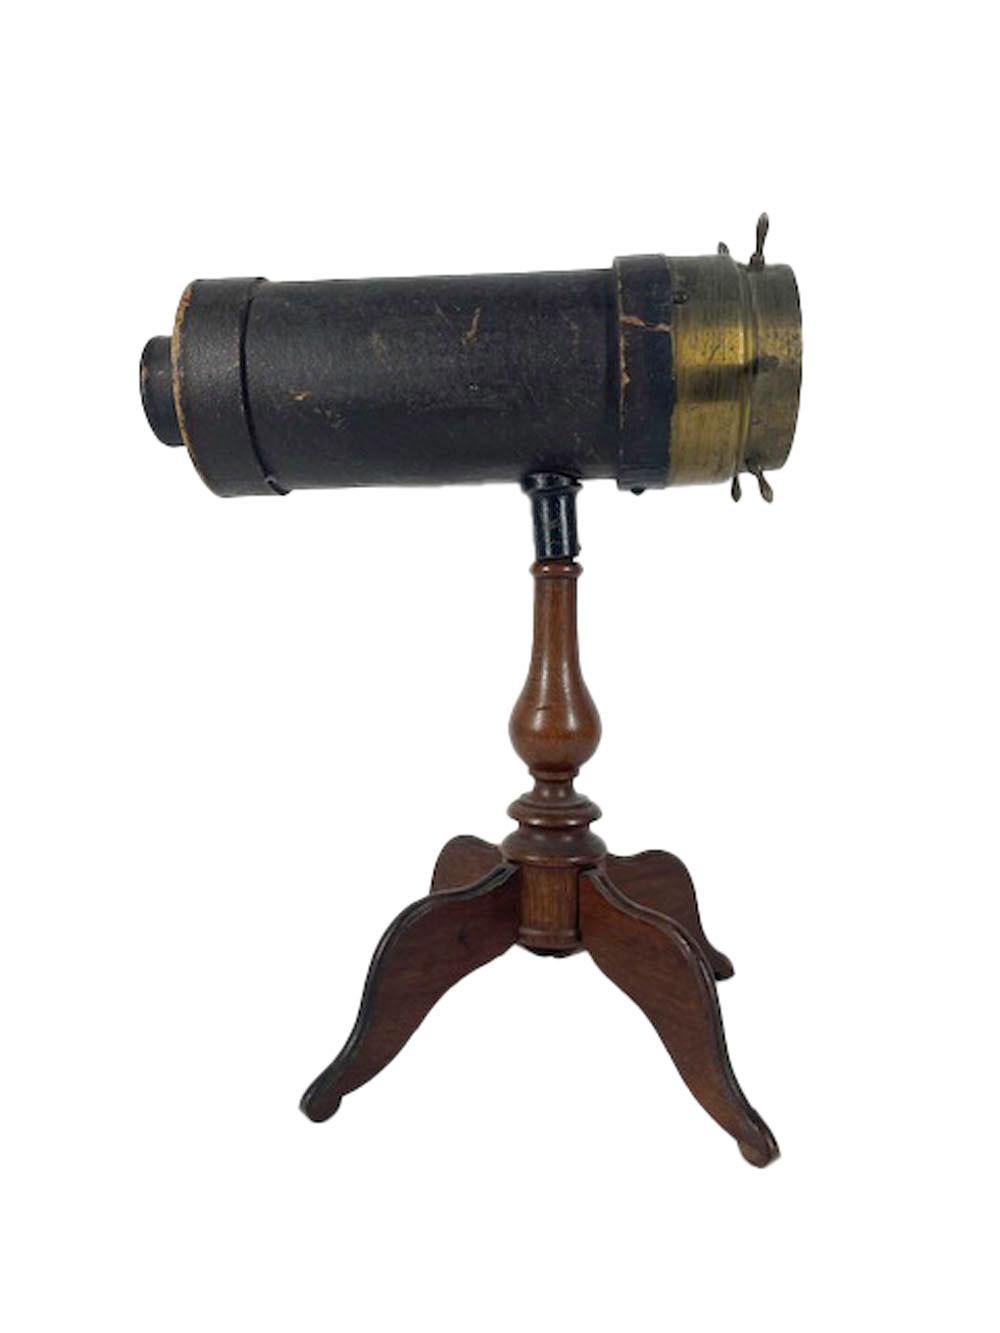 19th Century Parlor Kaleidoscope by C.G. Bush & Co. of Providence, RI In Good Condition For Sale In Nantucket, MA